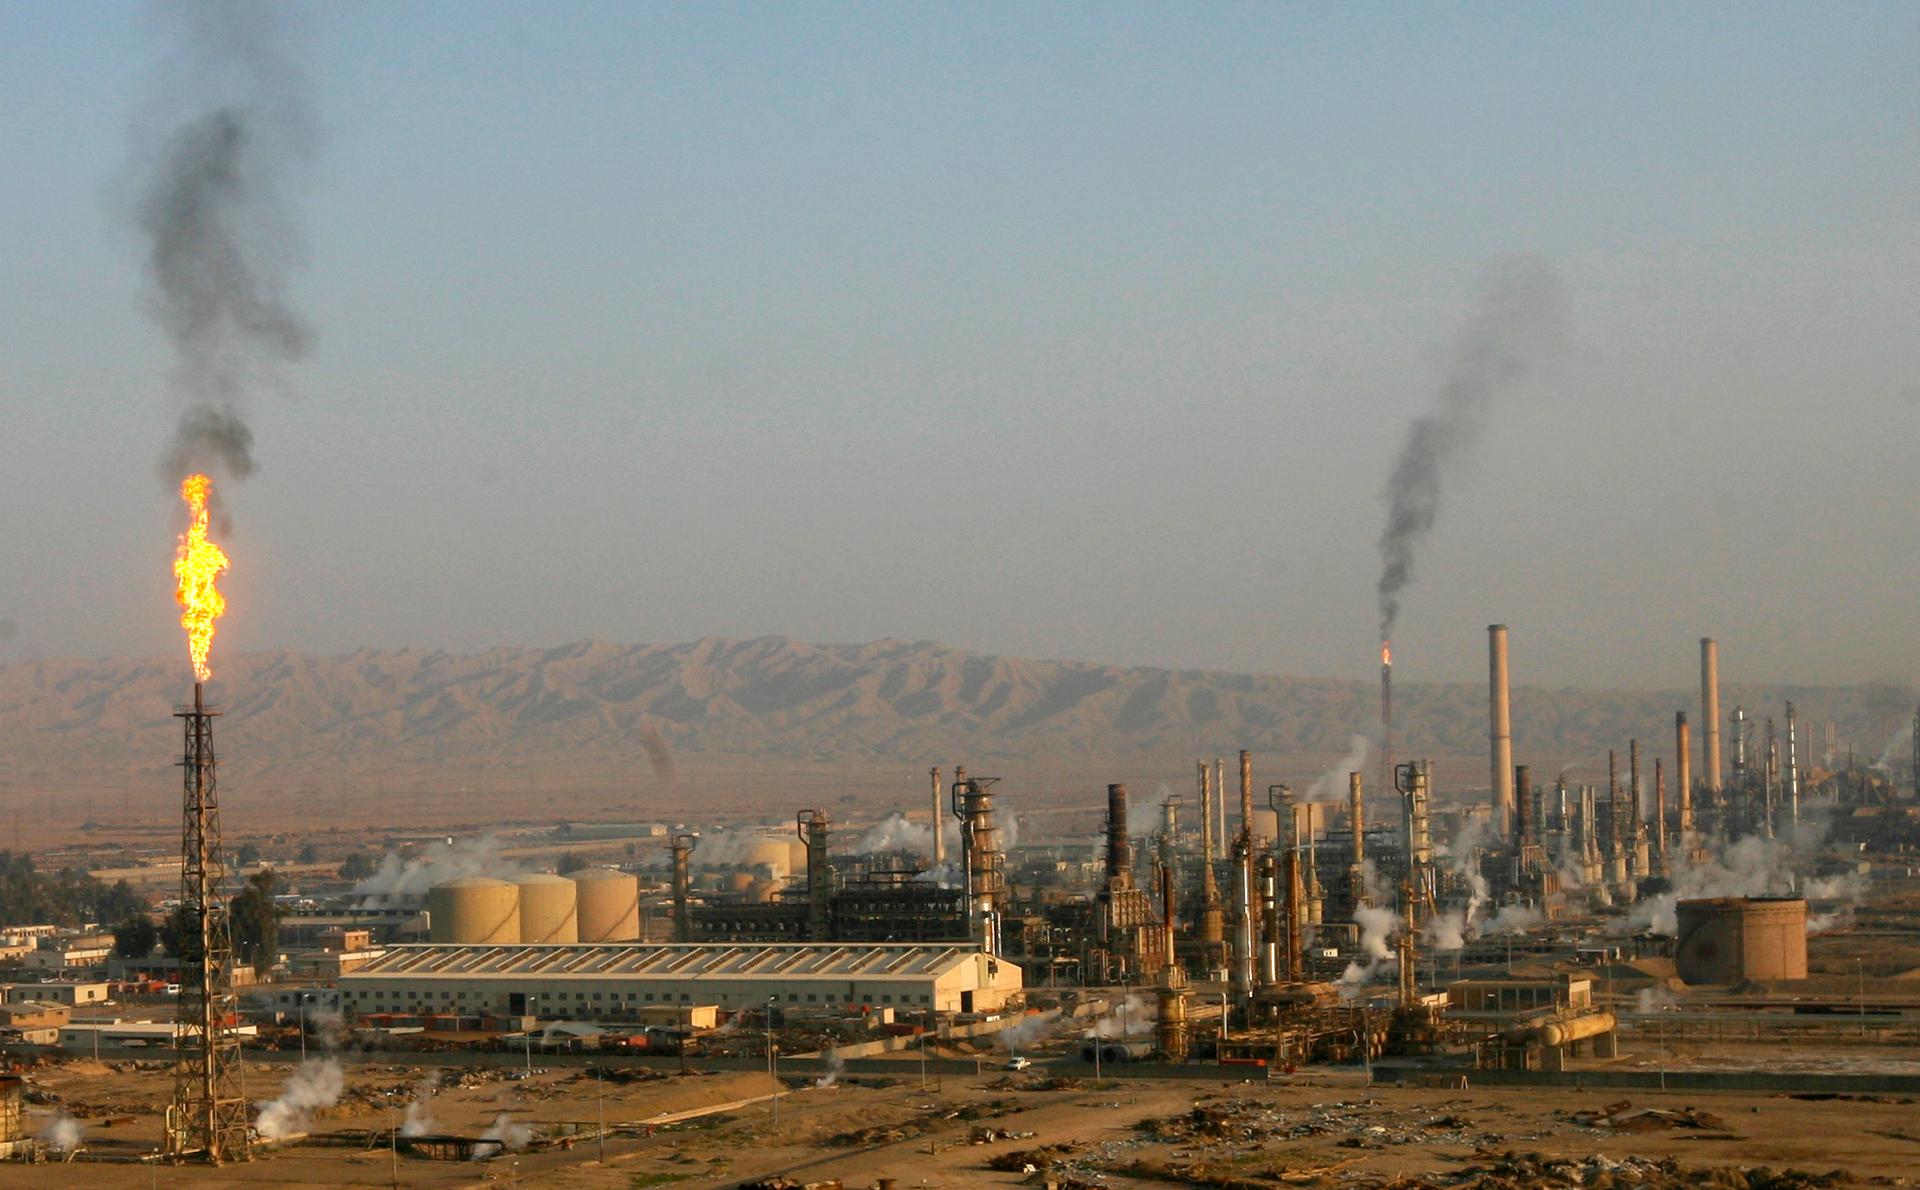 A general view of the Baiji oil refinery, Iraq's largest, in 2009. Today it's being held — barely — by Iraqi forces against ISIS fighters.